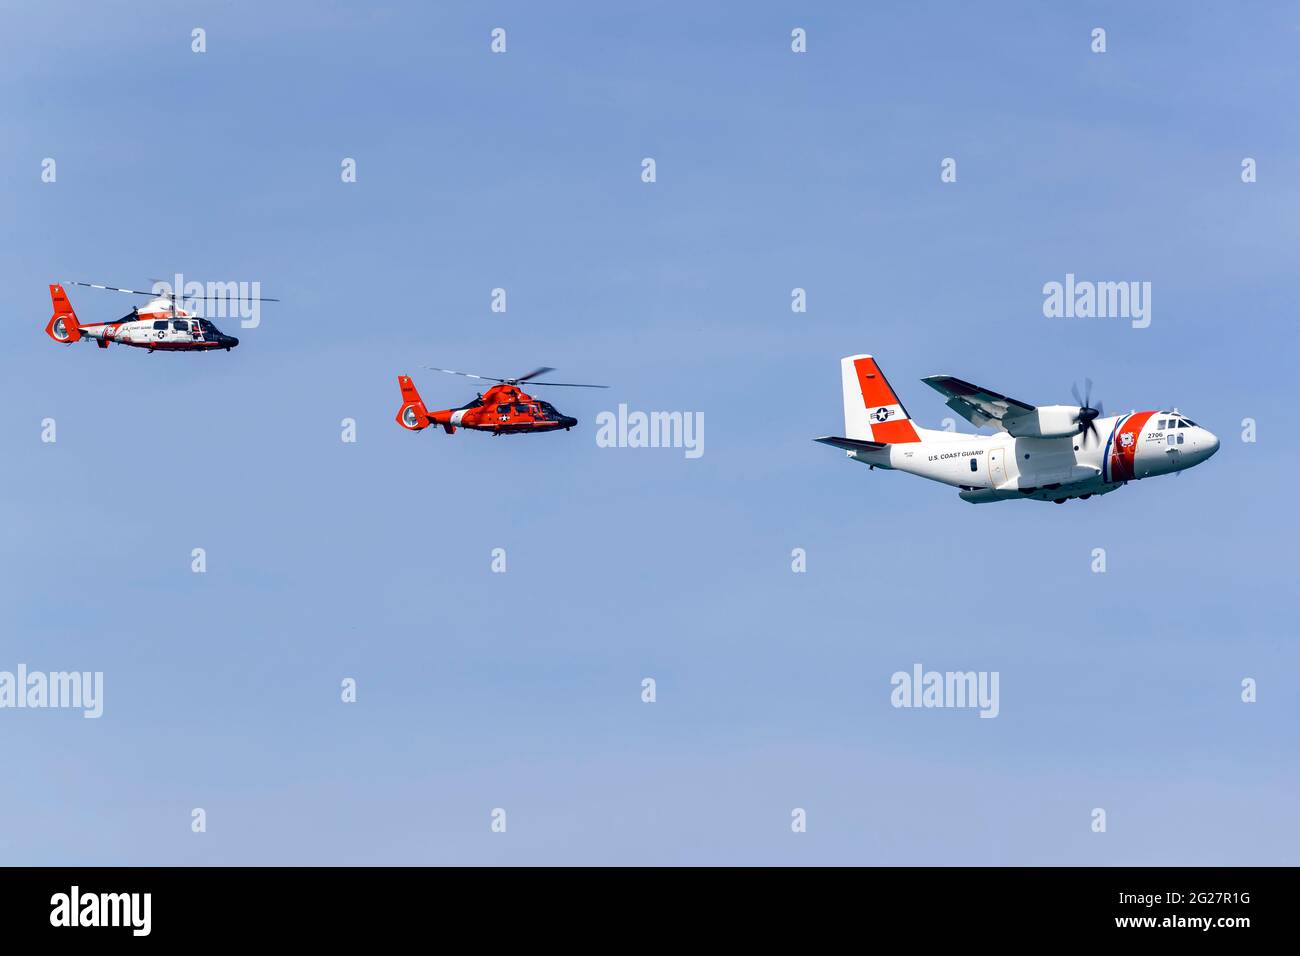 A U.S. Coast Guard C-27J flying in formation with two MH-65 Dolphin helicopters. Stock Photo